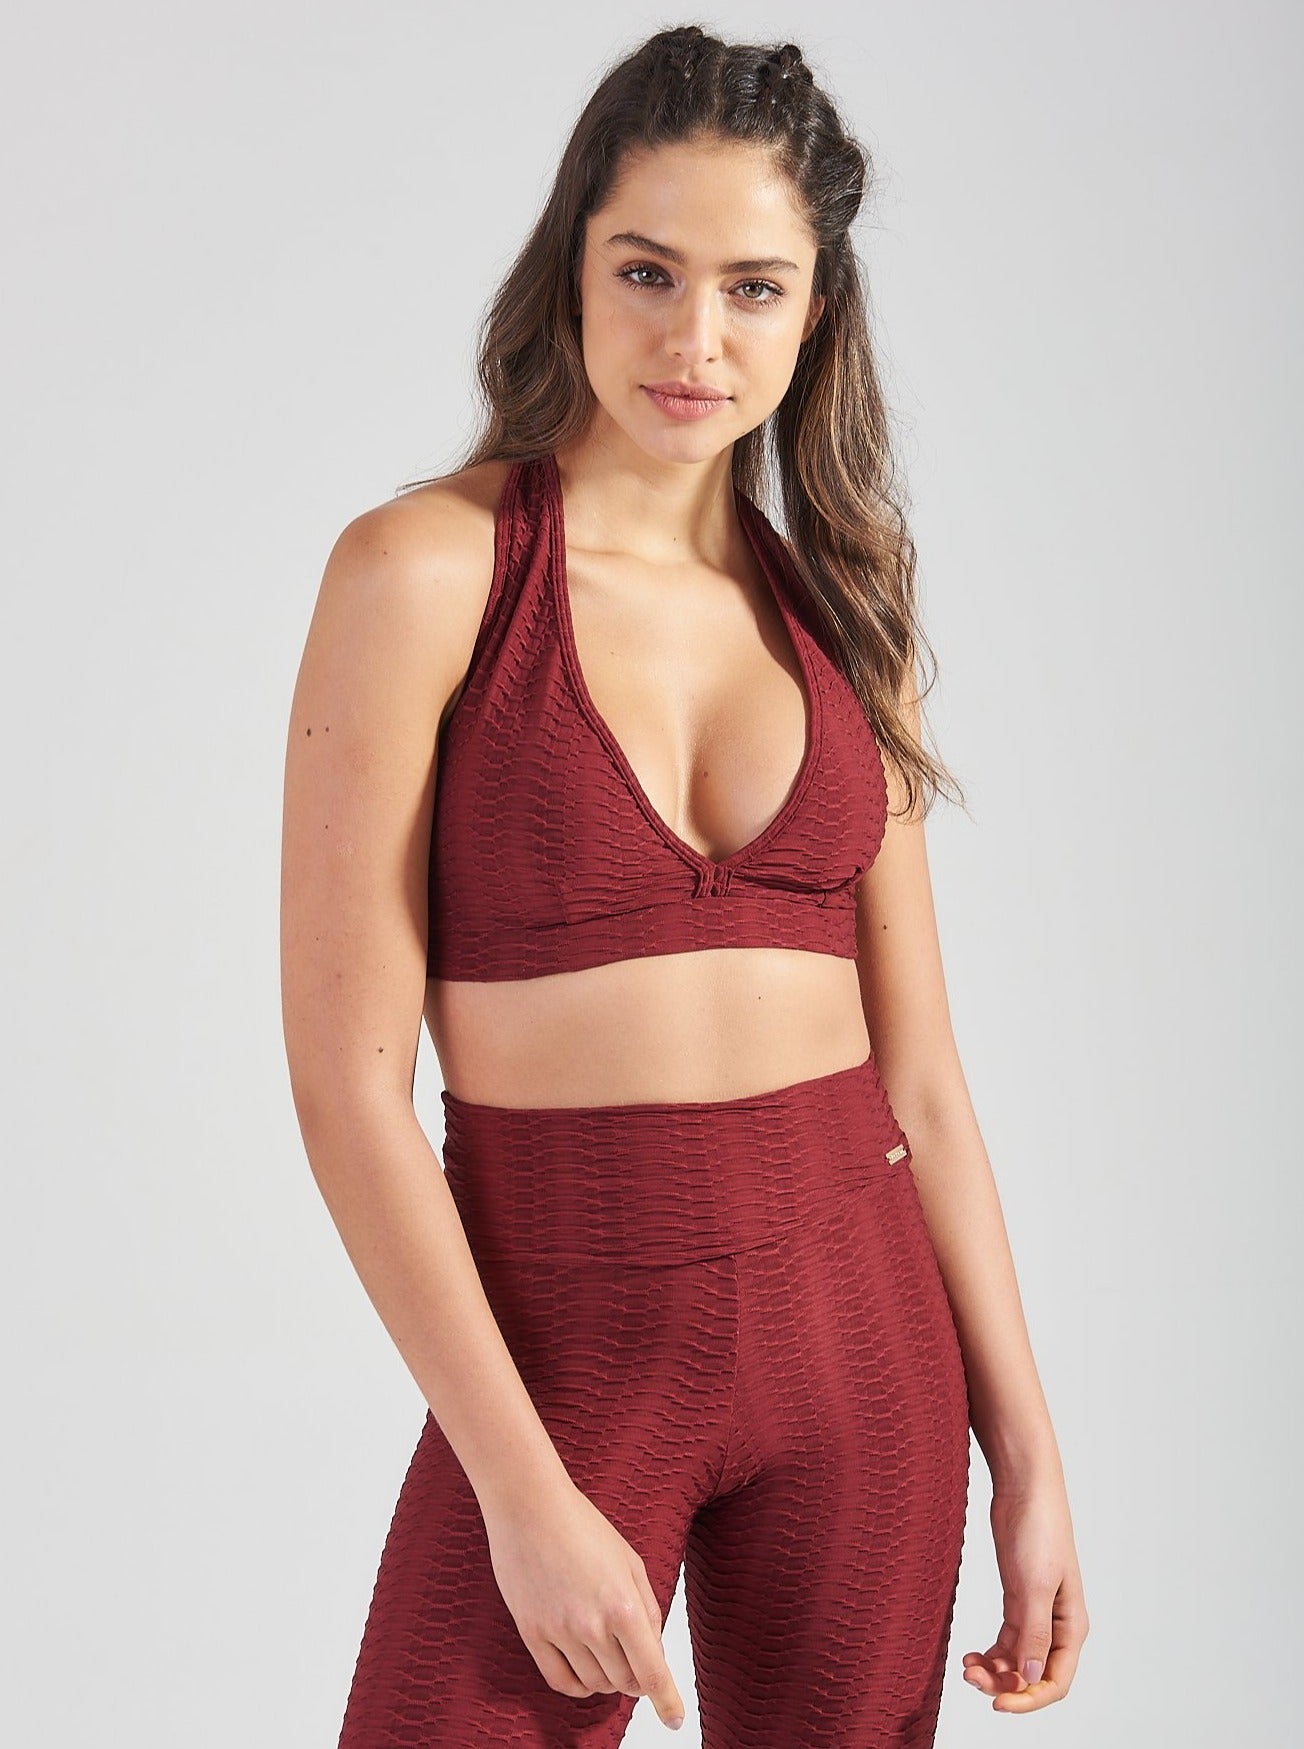 Women's Figure Skating Strappy Sports Bra in Red